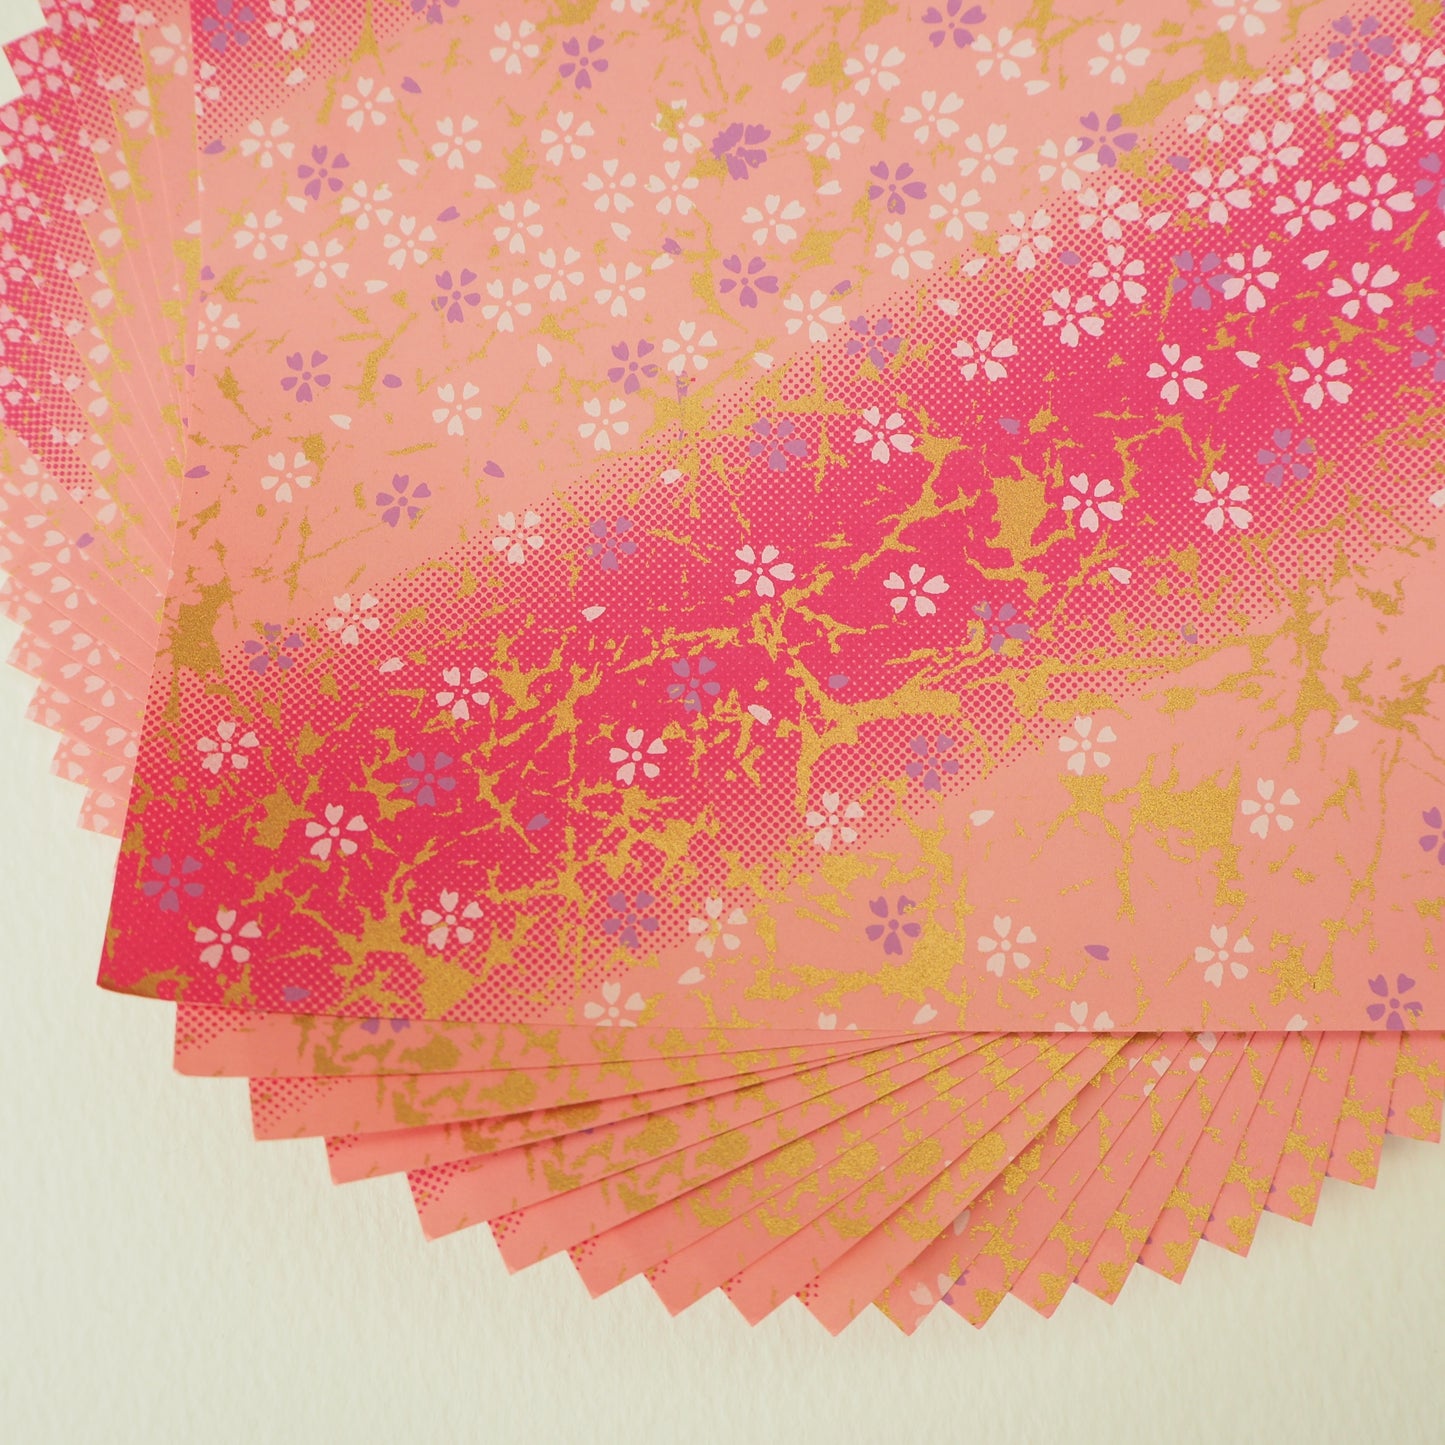 Pack of 20 Sheets 14x14cm Yuzen Washi Origami Paper HZ-340 - Small Cherry Blossom Pink Shade